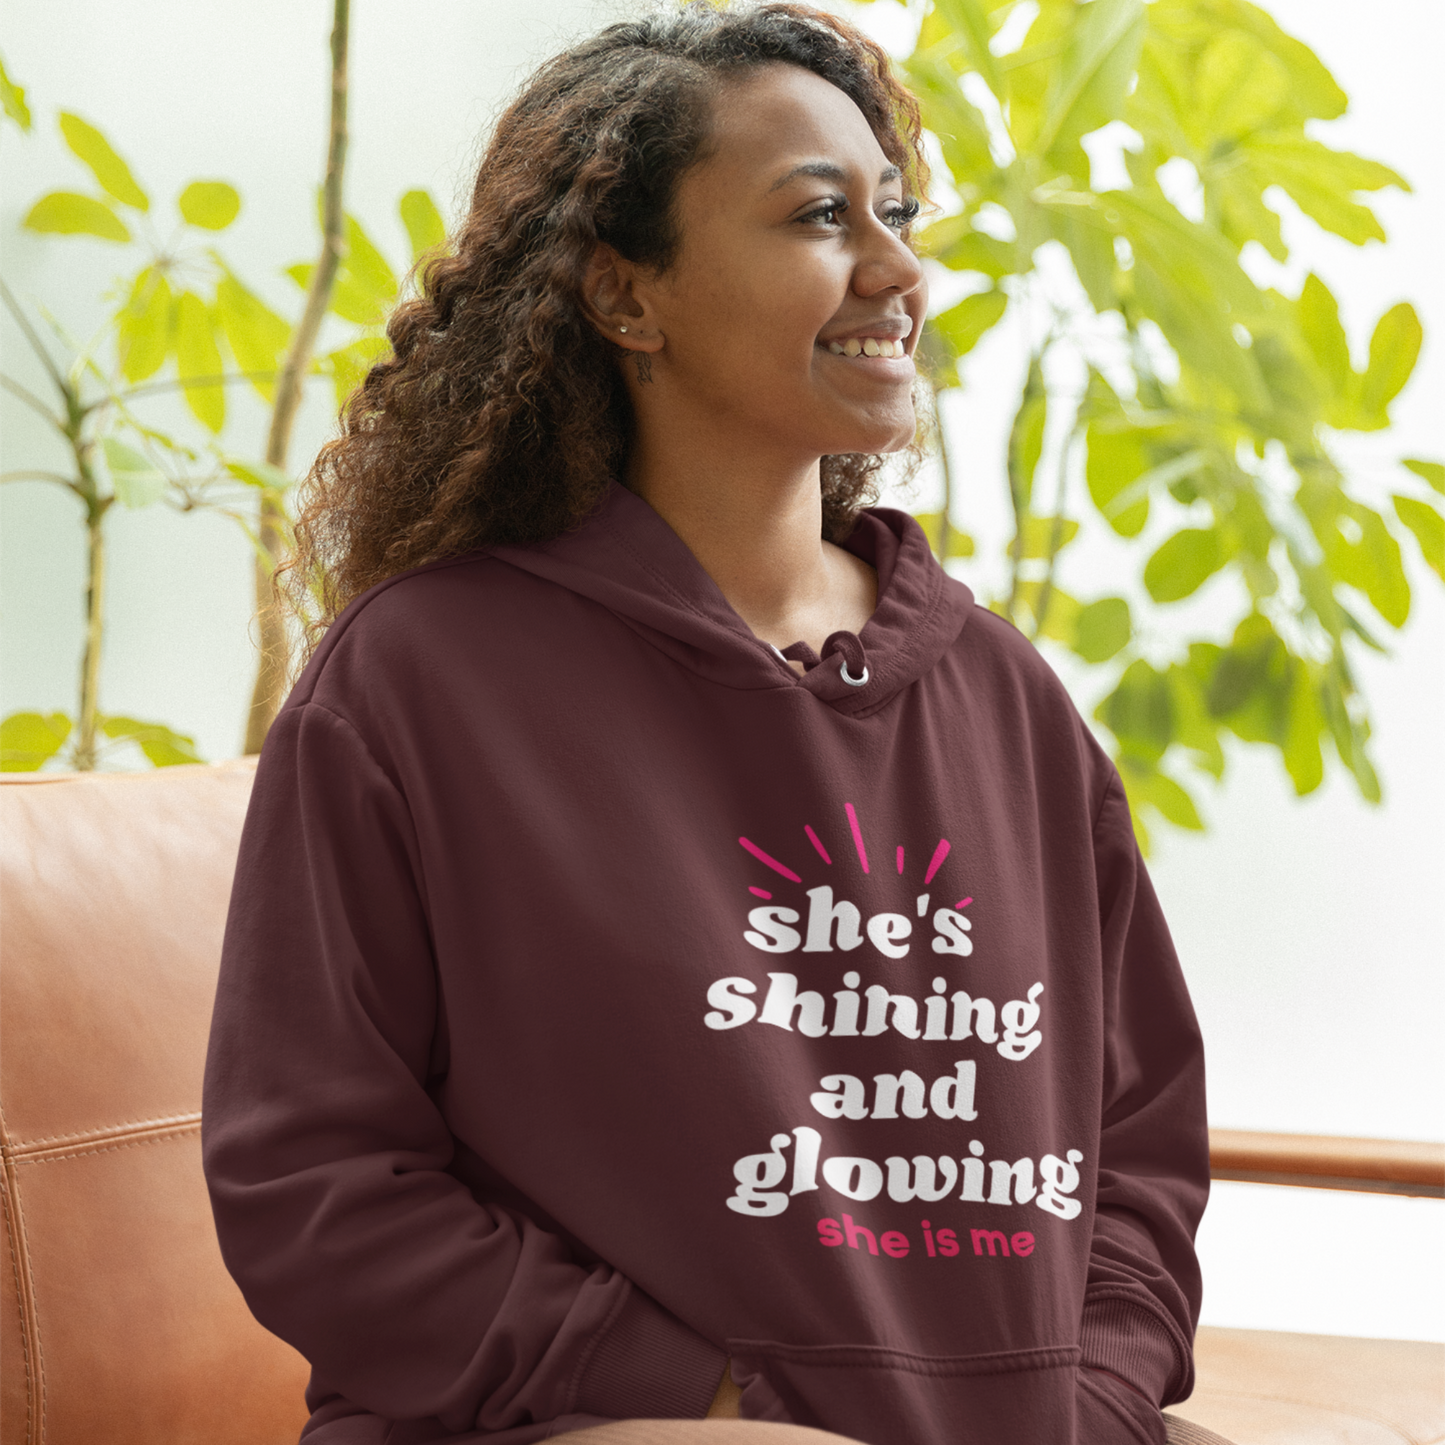 She’s Shining and Glowing: She is Me (Graphic White & Fuchsia Text) Unisex Heavy Blend Hoodie - Style: Gildan 18500